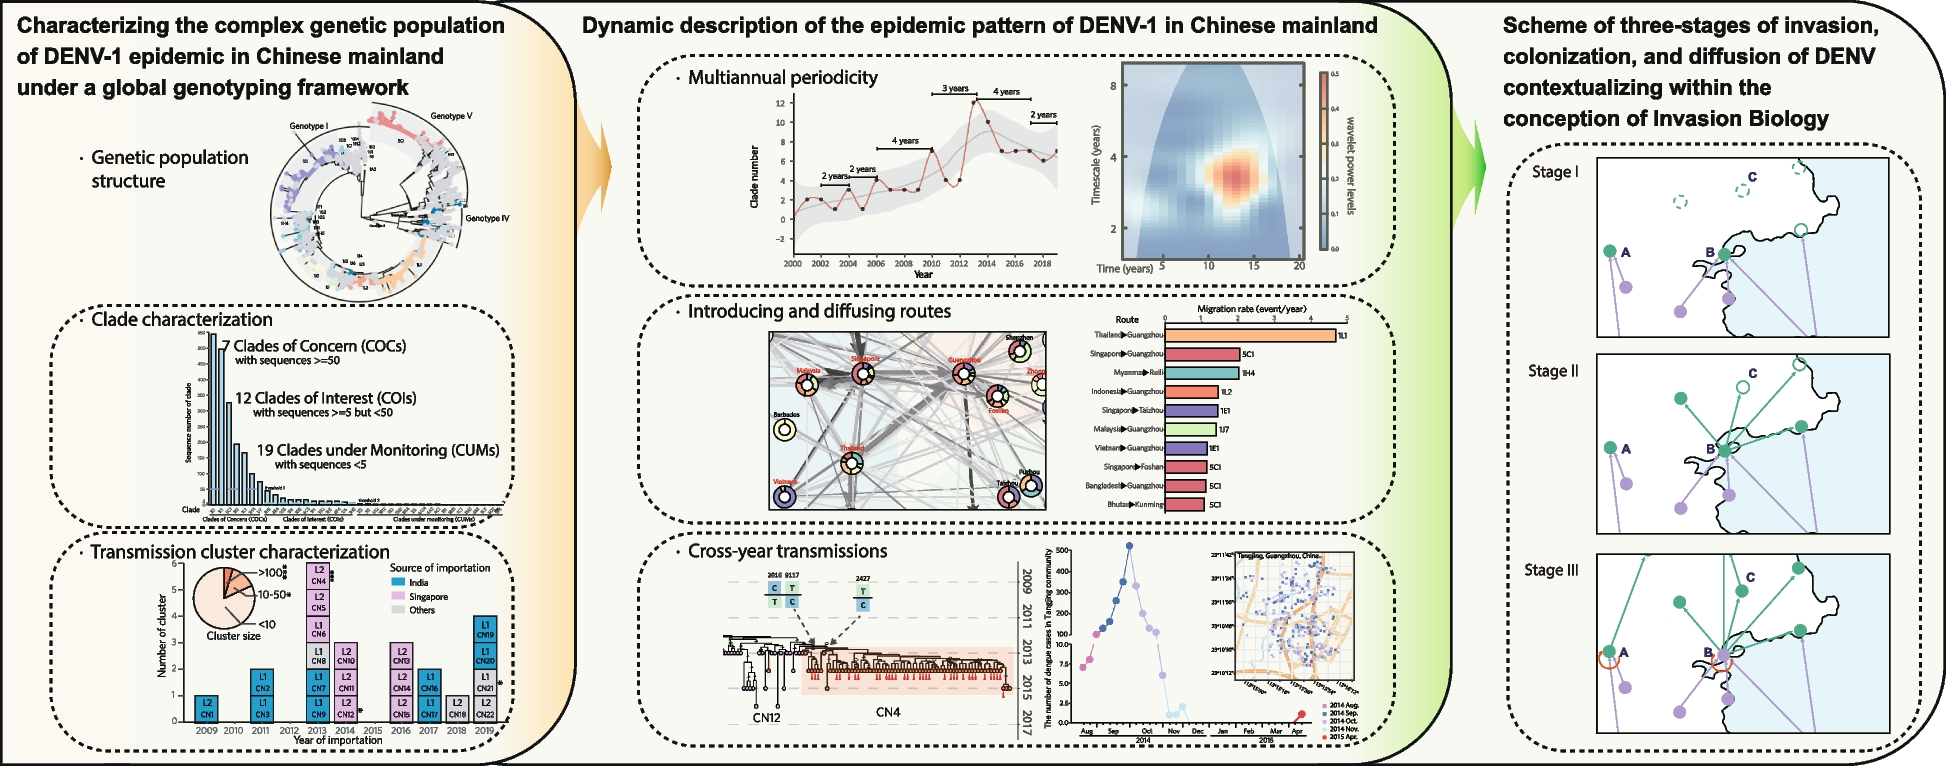 Phylodynamics unveils invading and diffusing patterns of dengue virus serotype-1 in Guangdong, China from 1990 to 2019 under a global genotyping framework